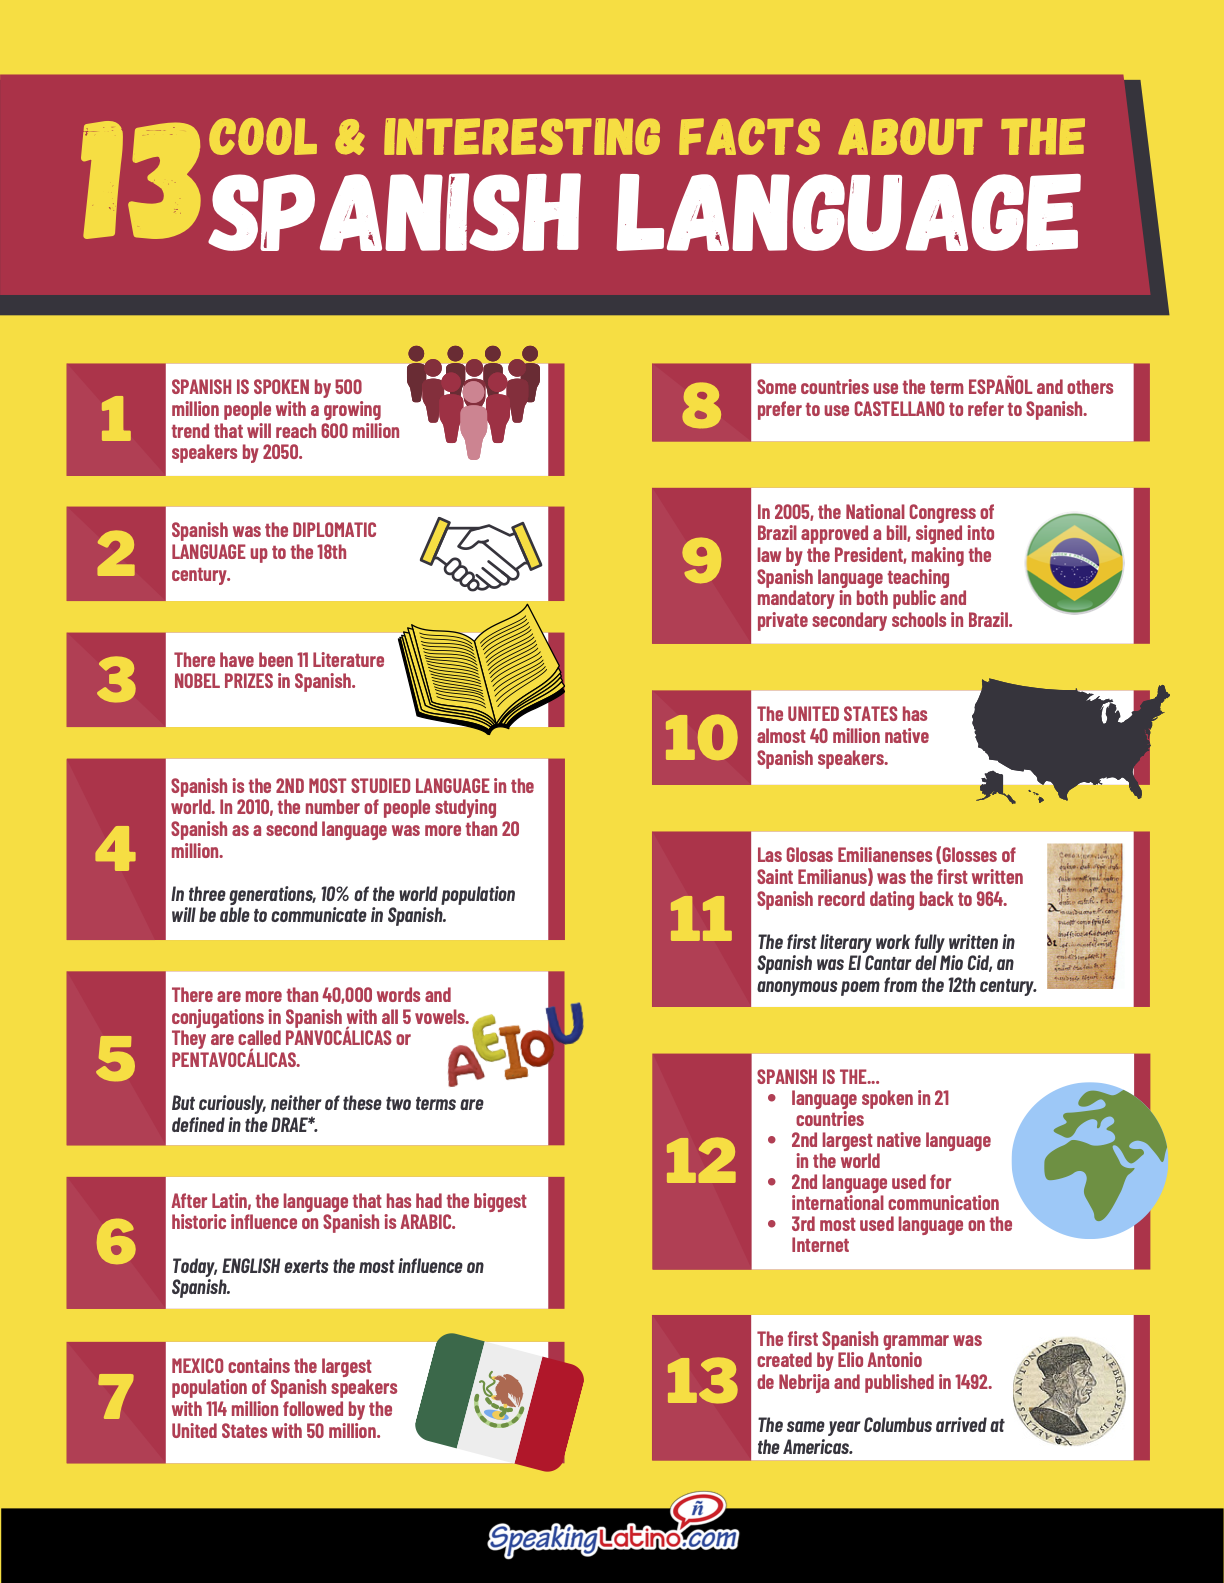 write an essay expressing your ideas about spanish language